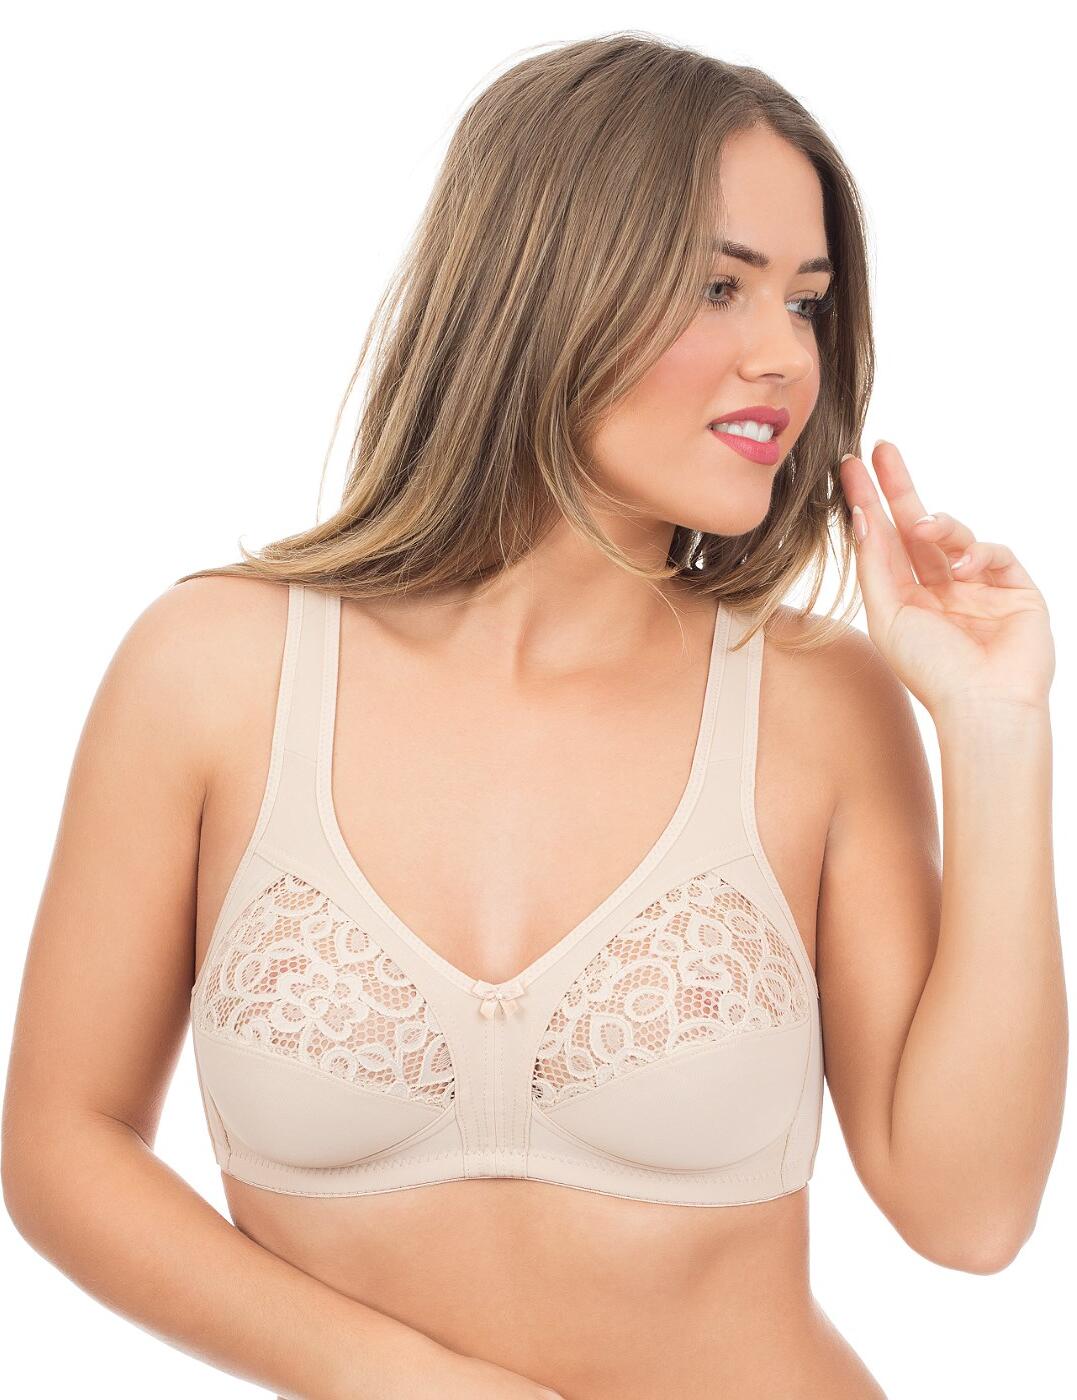 NATURANA NON WIRED Soft Cup Bra 86666 95067 95068 Black or White or Ivory  £12.99 - PicClick UK